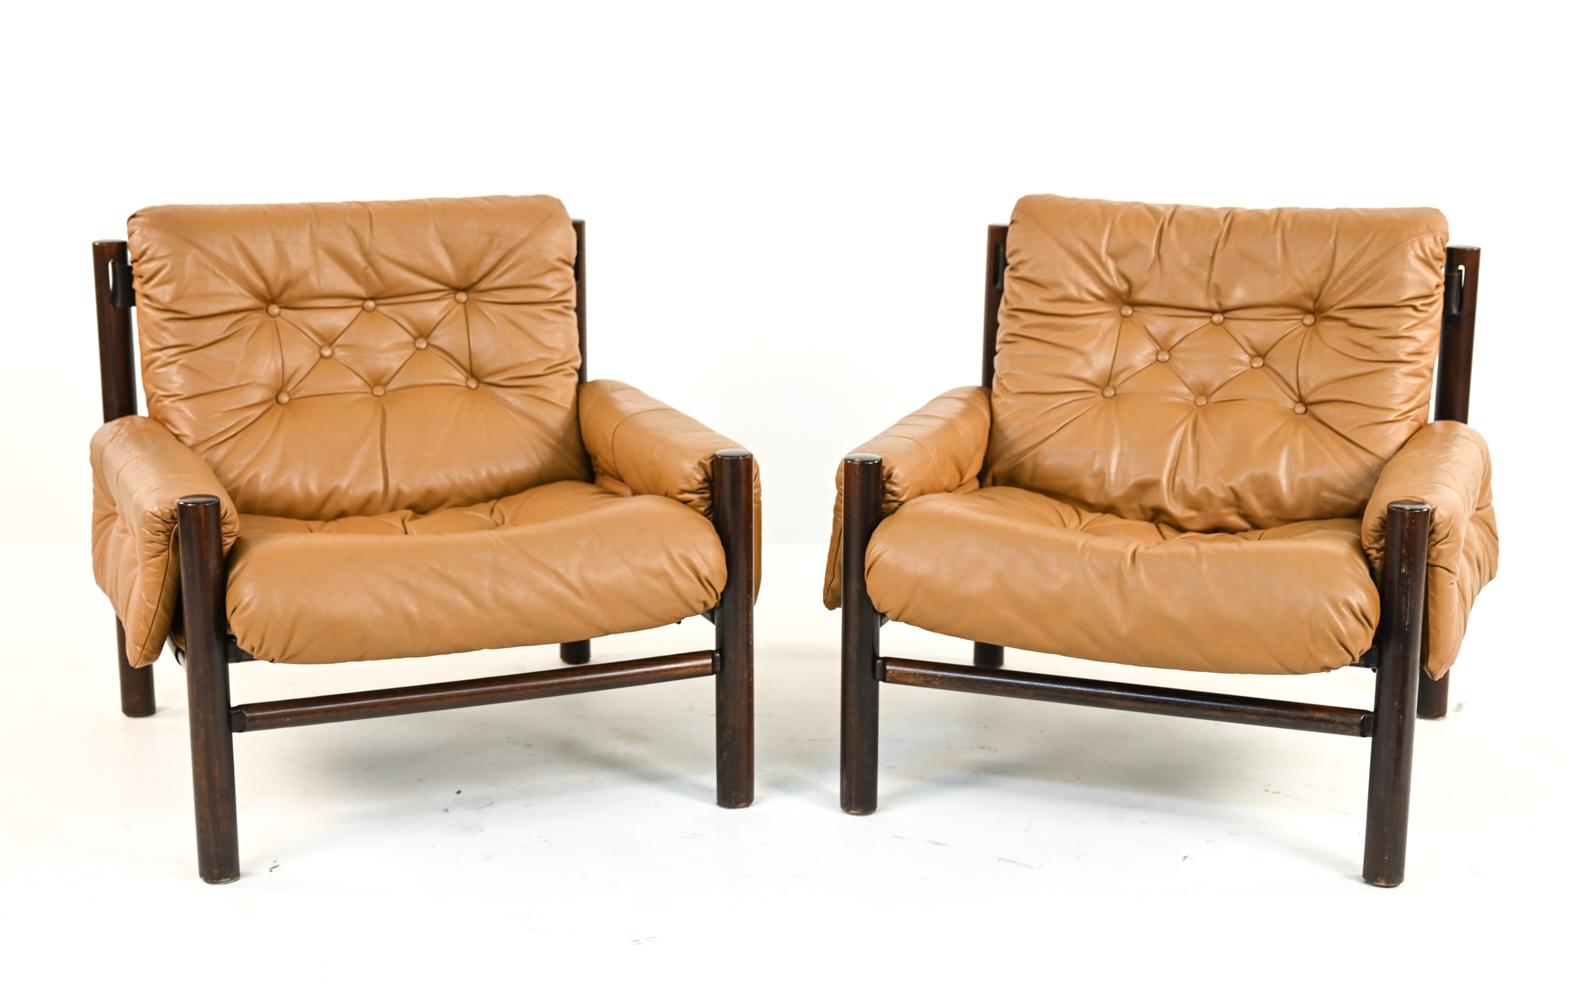 A handsome Danish mid-century pair of lounge chairs in the style of designers Percival Lafer and Arne Norell featuring rich butterscotch tufted leather cushions and a dark stained frame with interesting spindle backrests. These chairs feature many